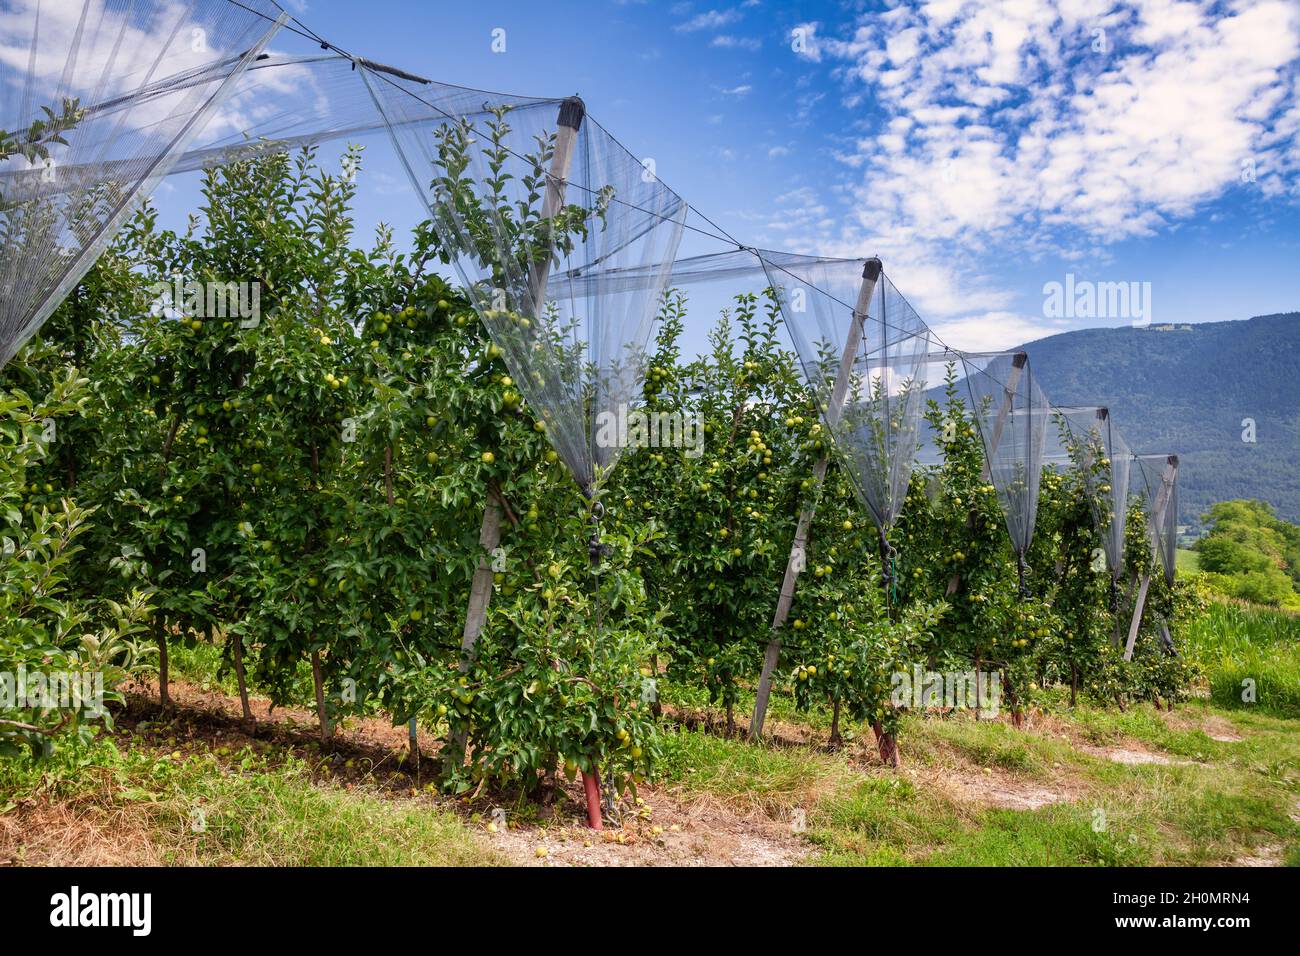 Rows of apple trees with rippening green apples in orchard at South Tyrol, Northern Italy Stock Photo